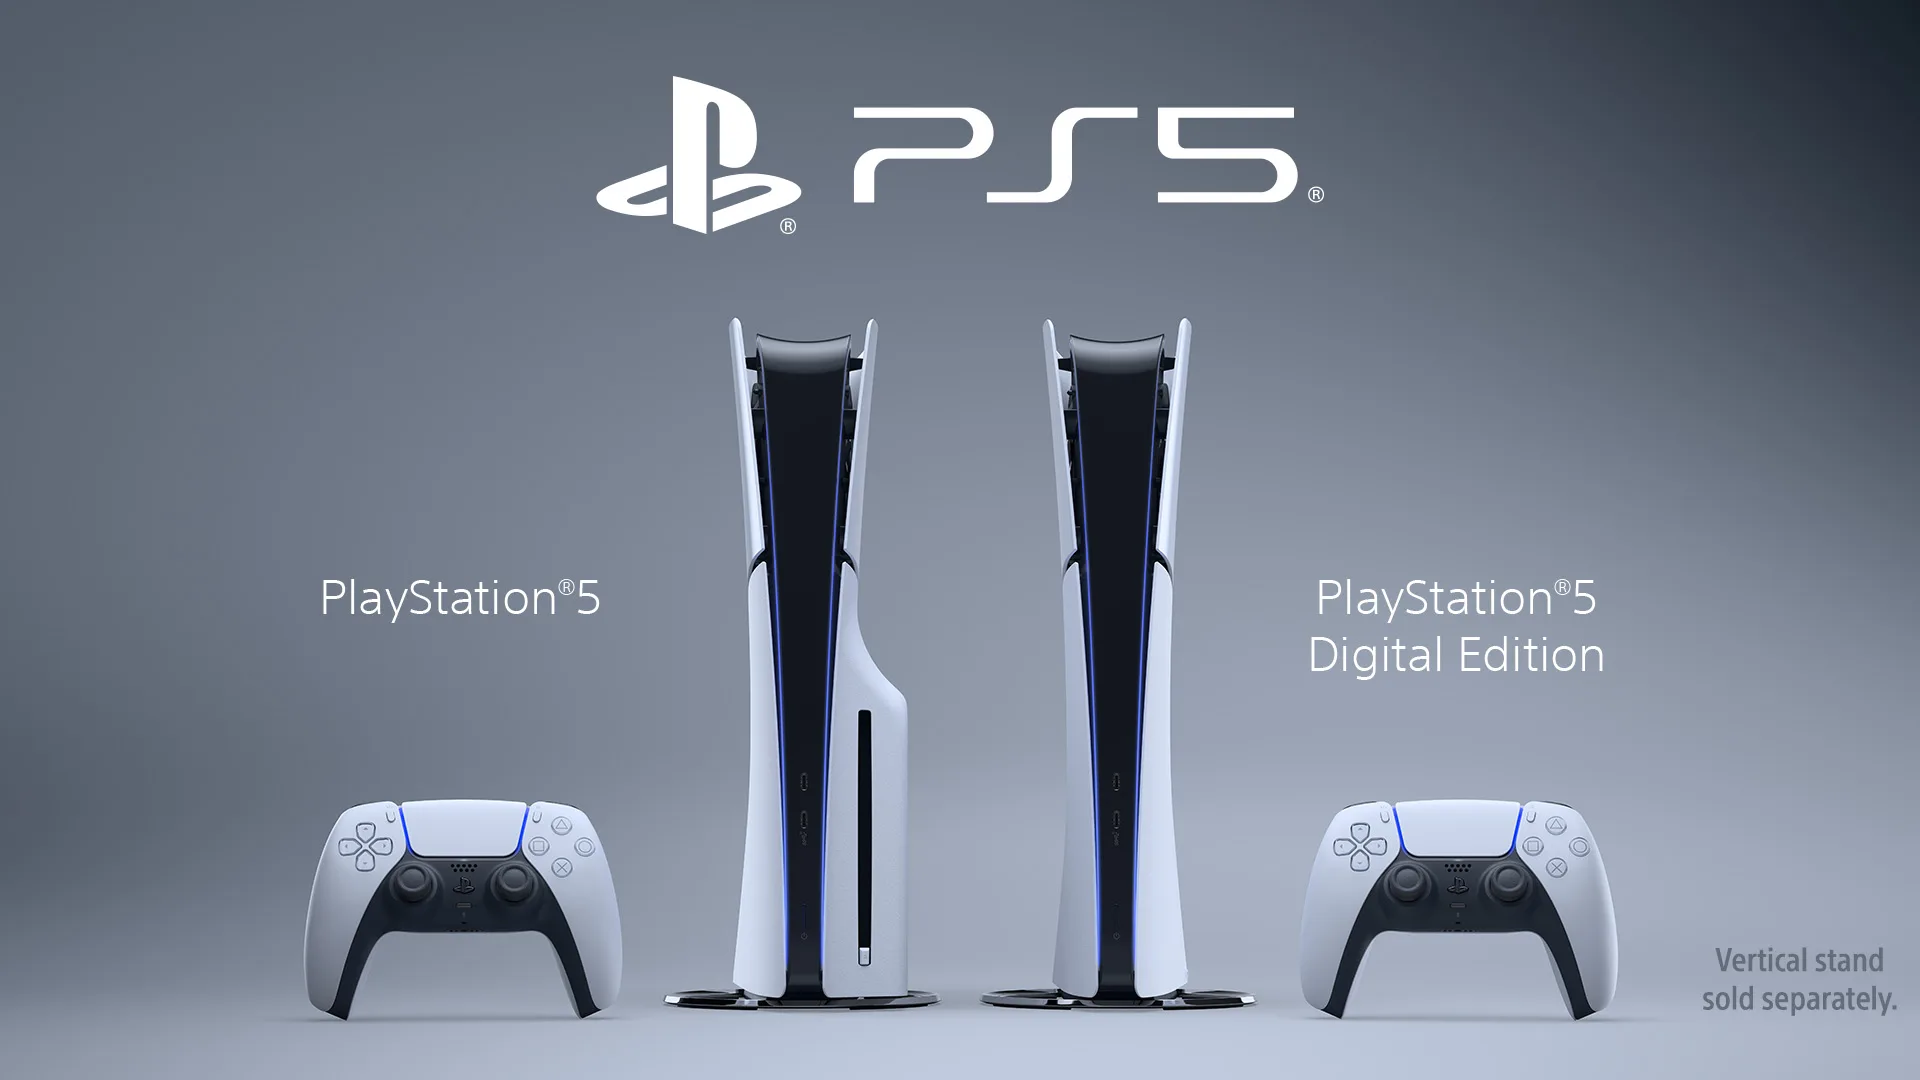 A look at the new PS5 consoles. There is a DualSense controller, the disc version of the console, the digital version of the console, and another DualSense controller.